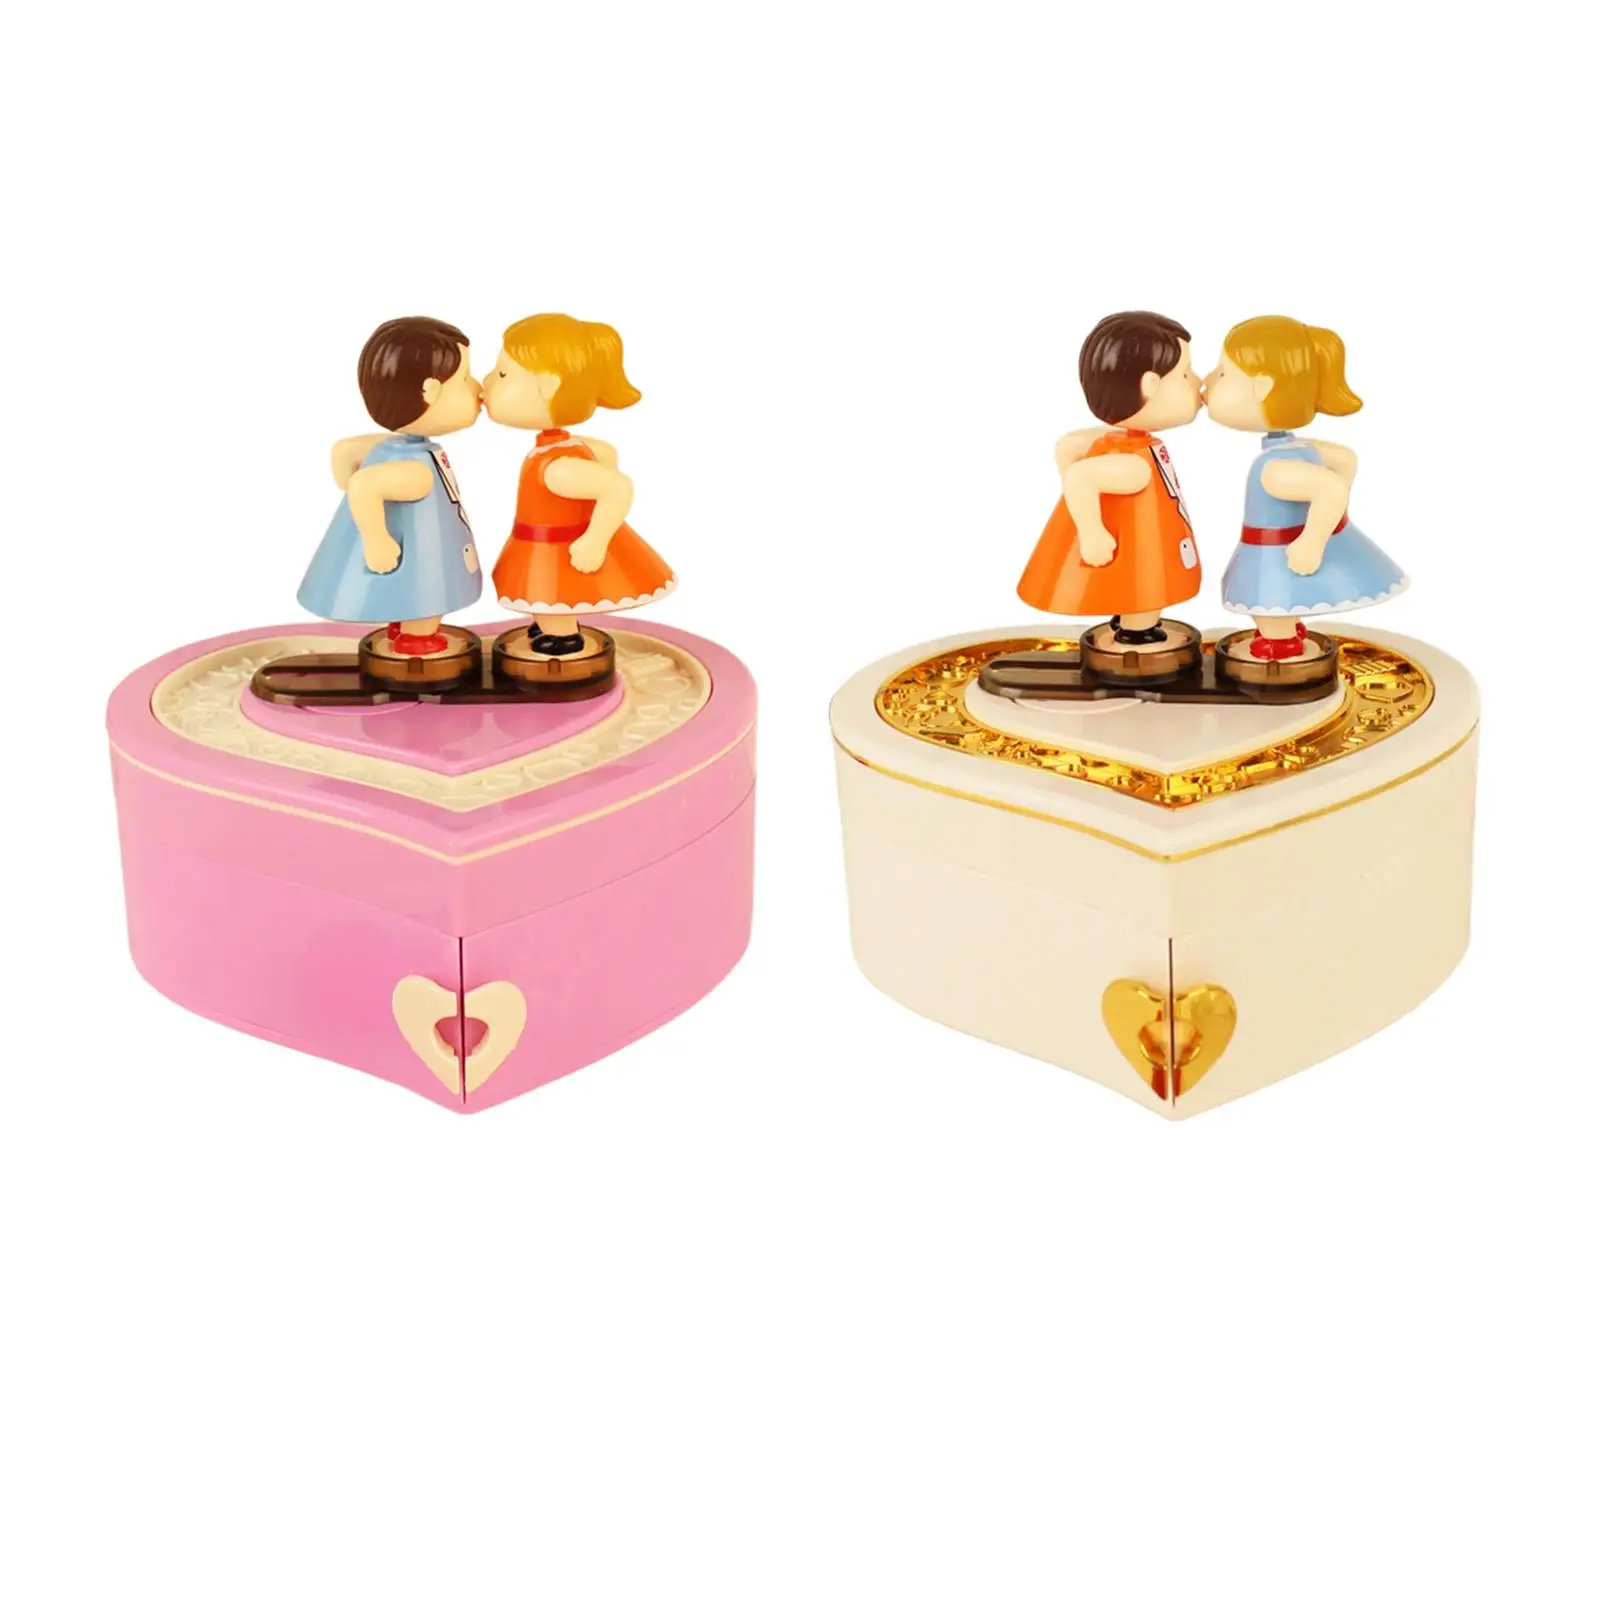 Kissing Couple Doll Music Box Romantic for Artware Ornament Holiady Gifts